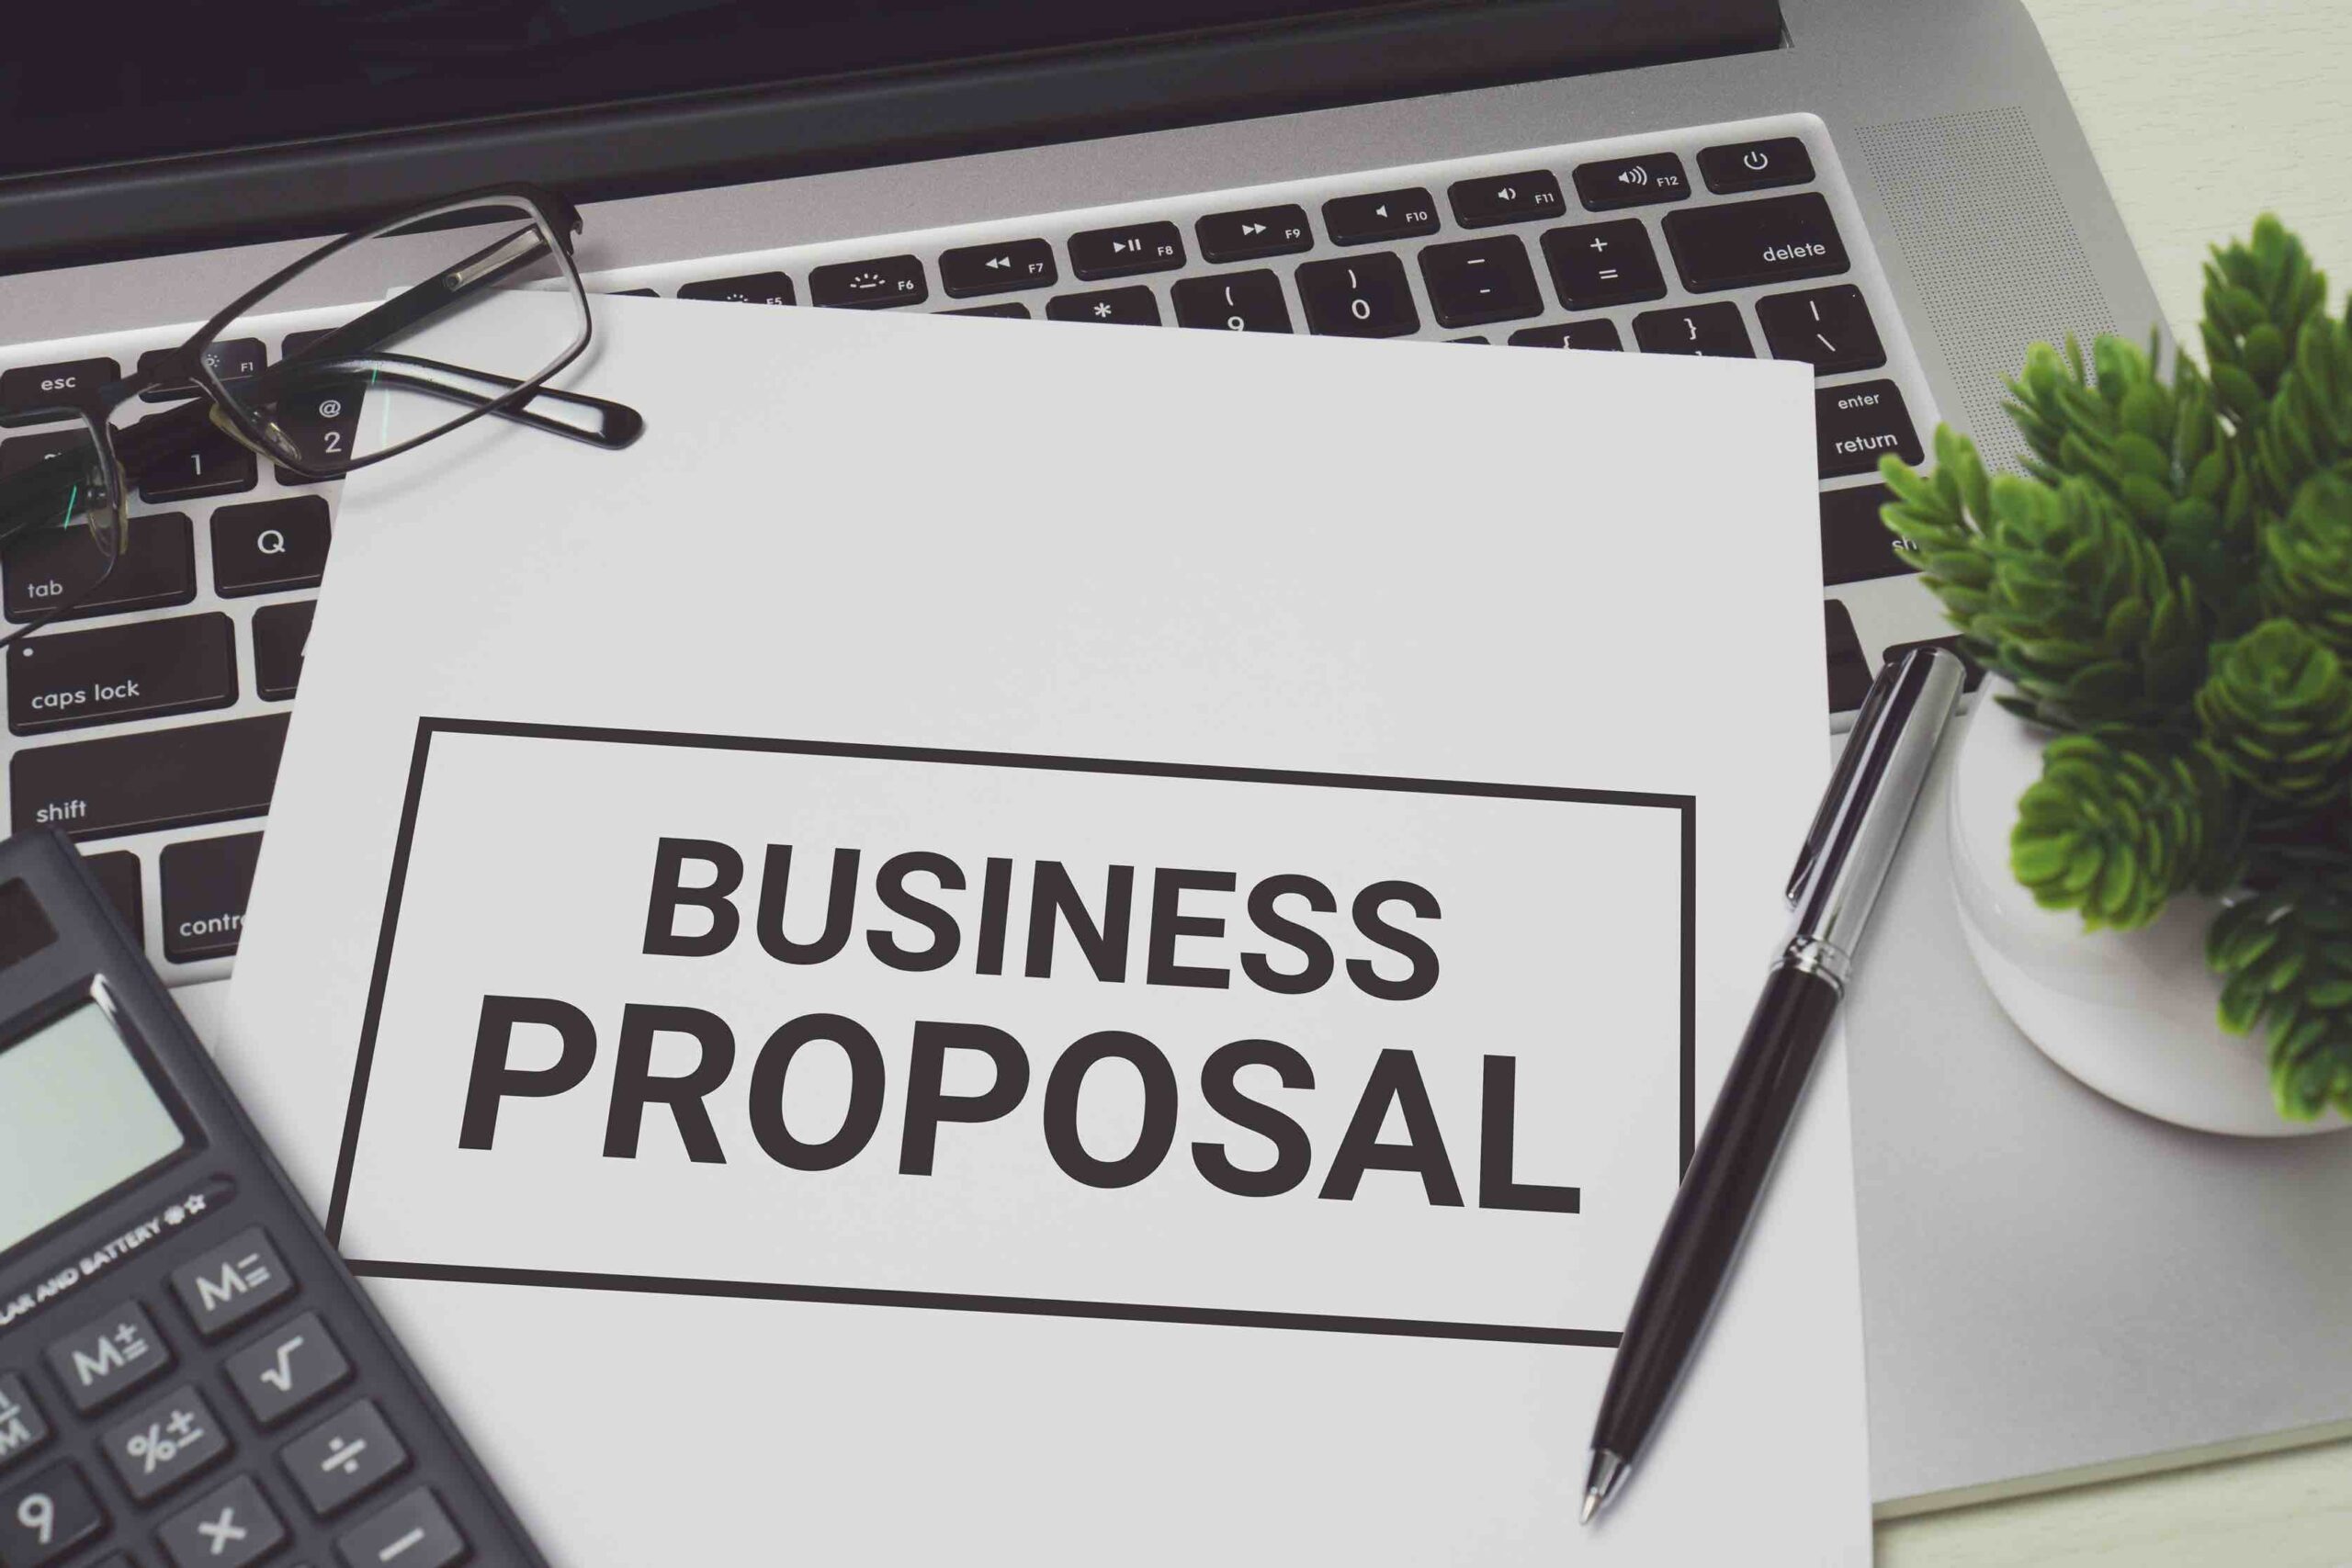 Business proposal on white paper placed on the laptop computer